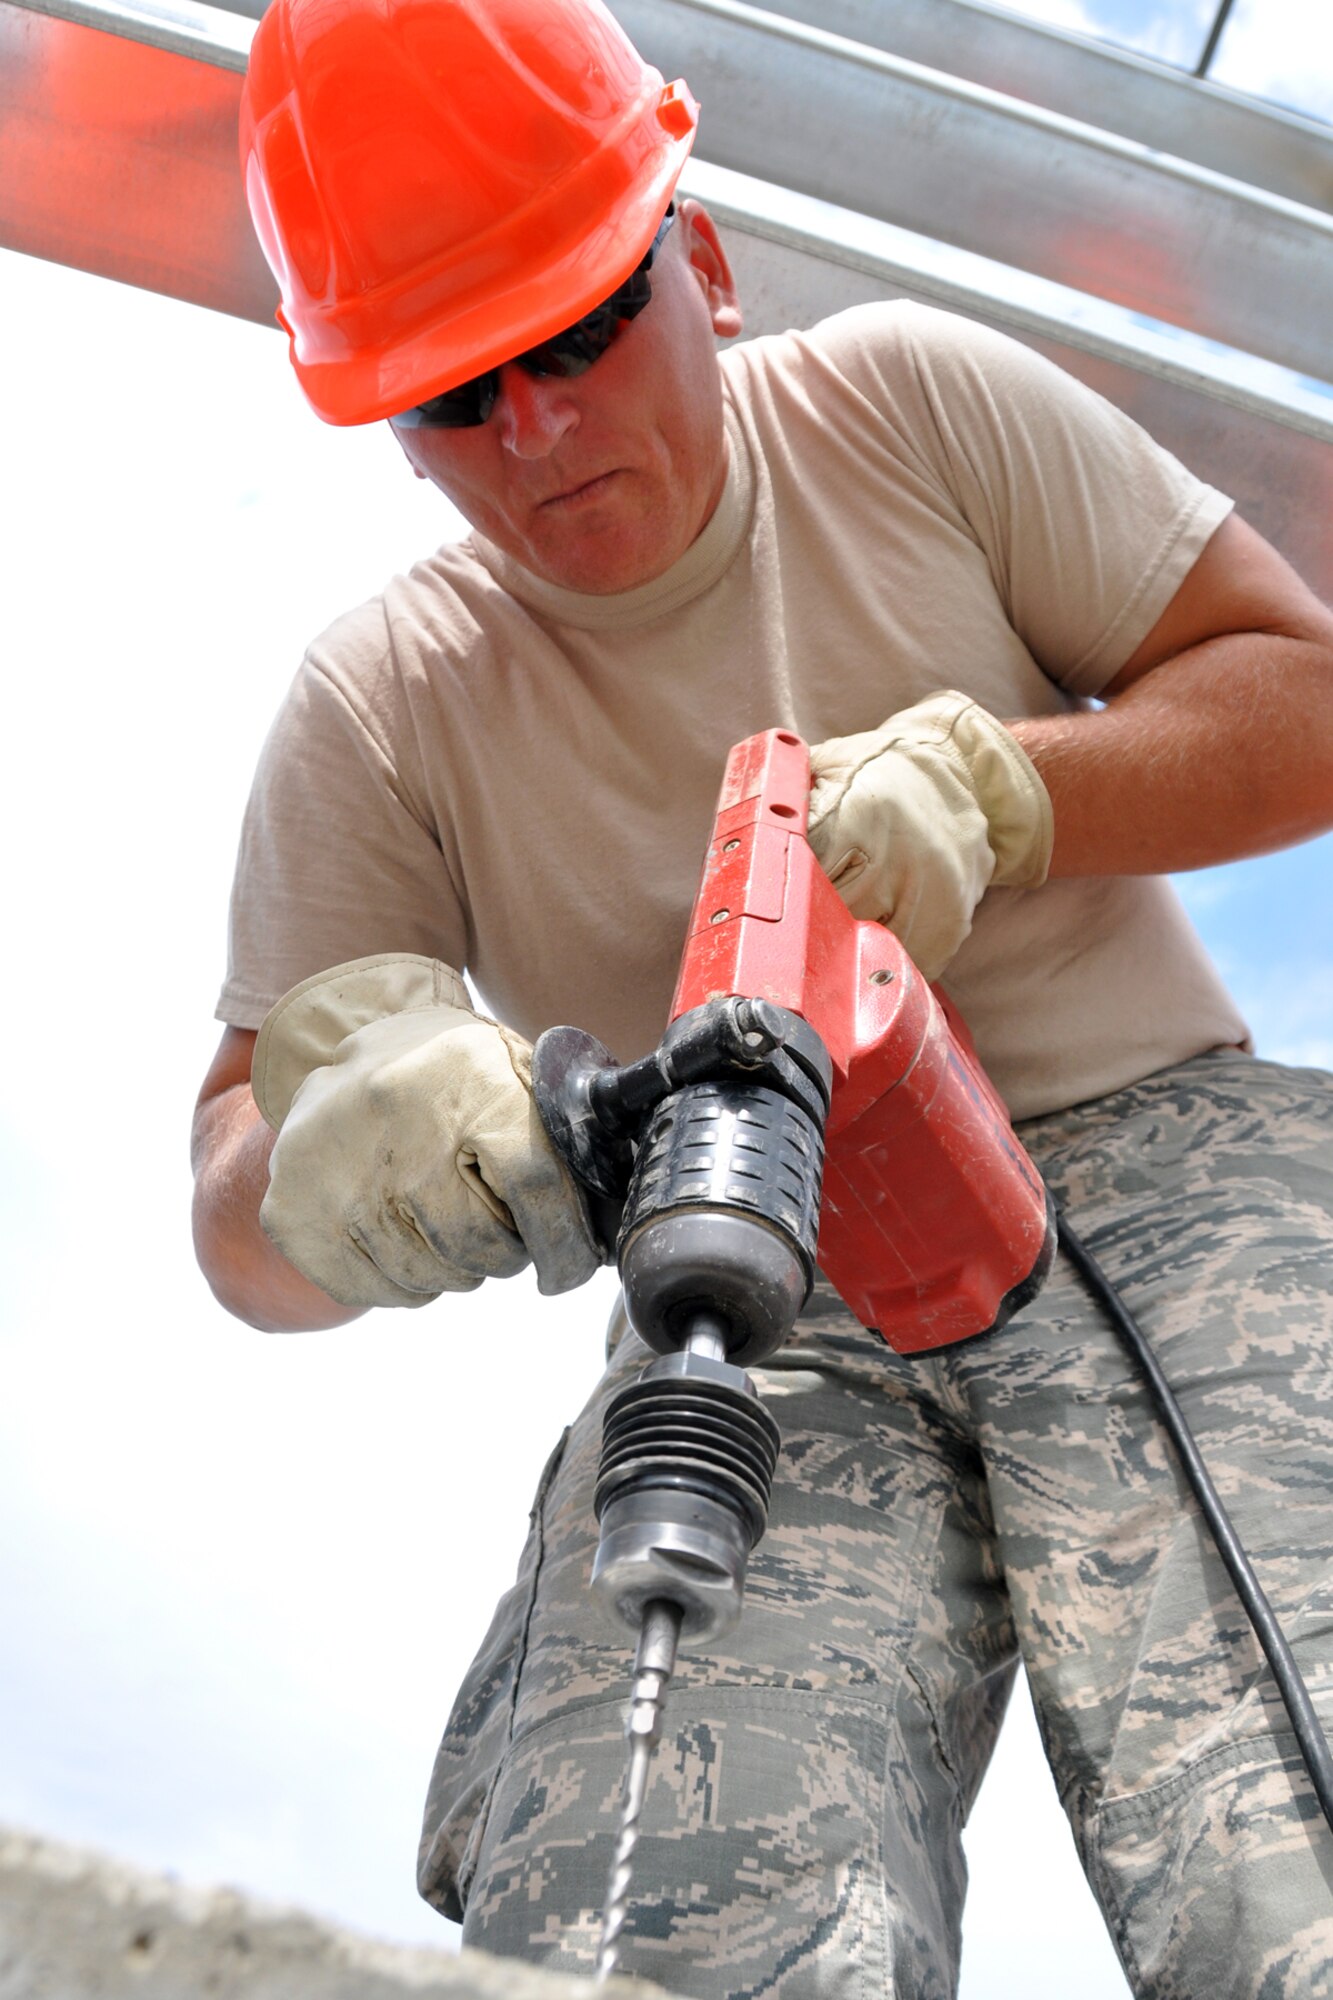 Tech. Sgt. Billy Smith, shop lead for power production at the 307th Civil Engineer Squadron, Barksdale Air Force Base, La., drills holes into a cement structure at Youngstown Air Reserve Station, Vienna, Ohio, Aug. 14, 2012. Morgan was part of a 29-person detail from Barksdale that spent two weeks at Youngstown assisting the 910th Civil Engineer Squadron build a Prime Base Engineer Emergency Force (Prime BEEF) training area. (U.S. Air Force photo by Master Sgt. Jeff Walston) 